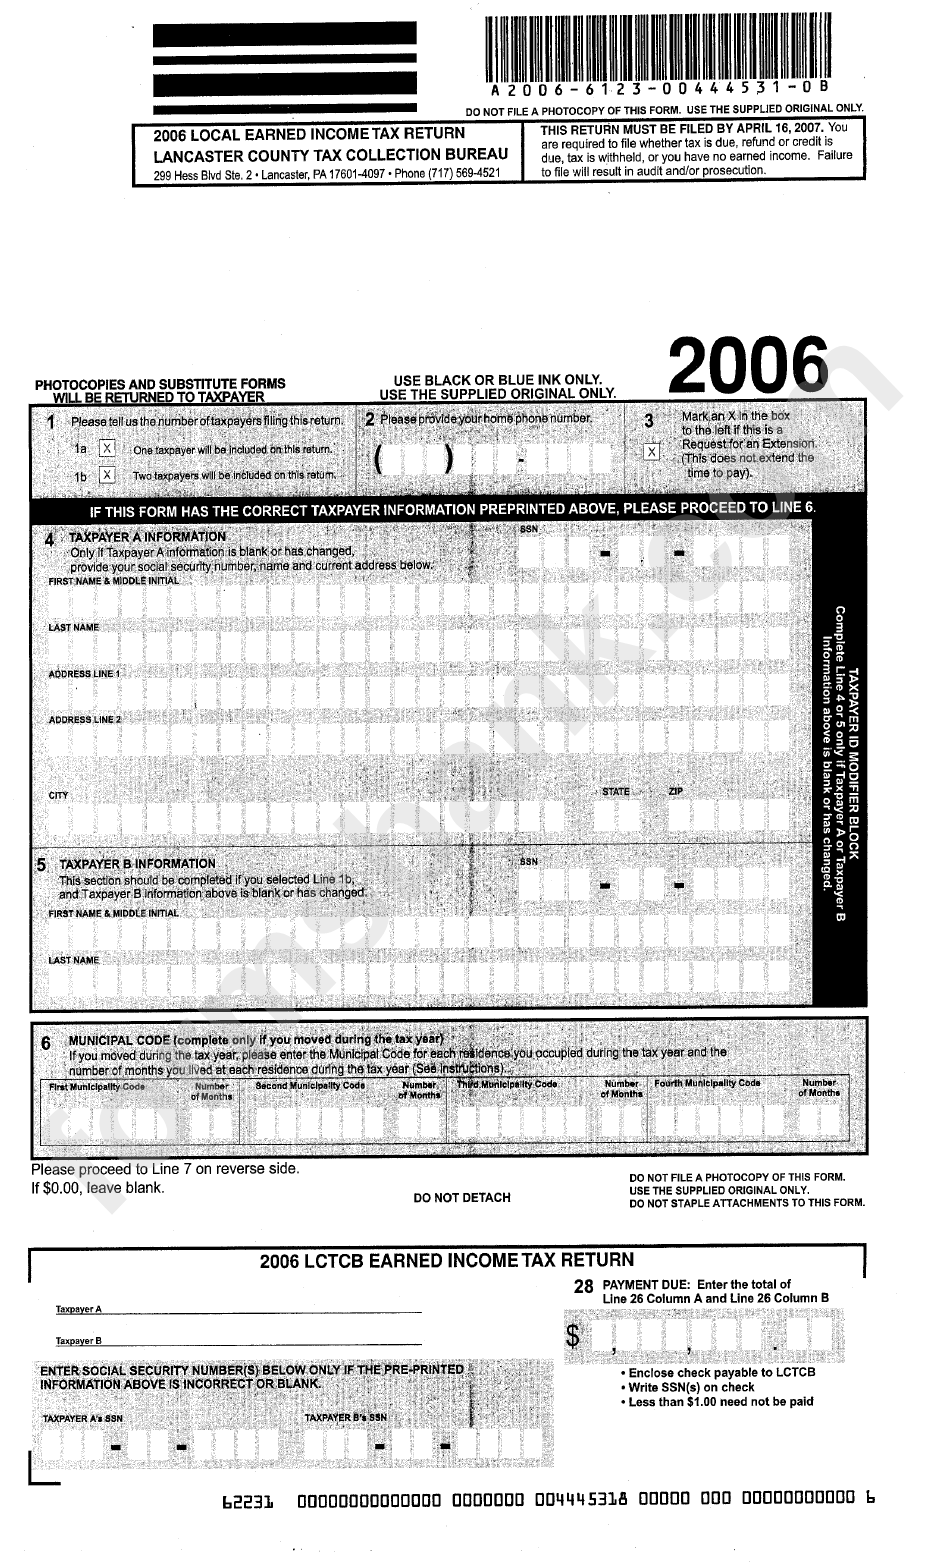 Local Earned Income Tax Return Form 2006 - Lancaster County Tax